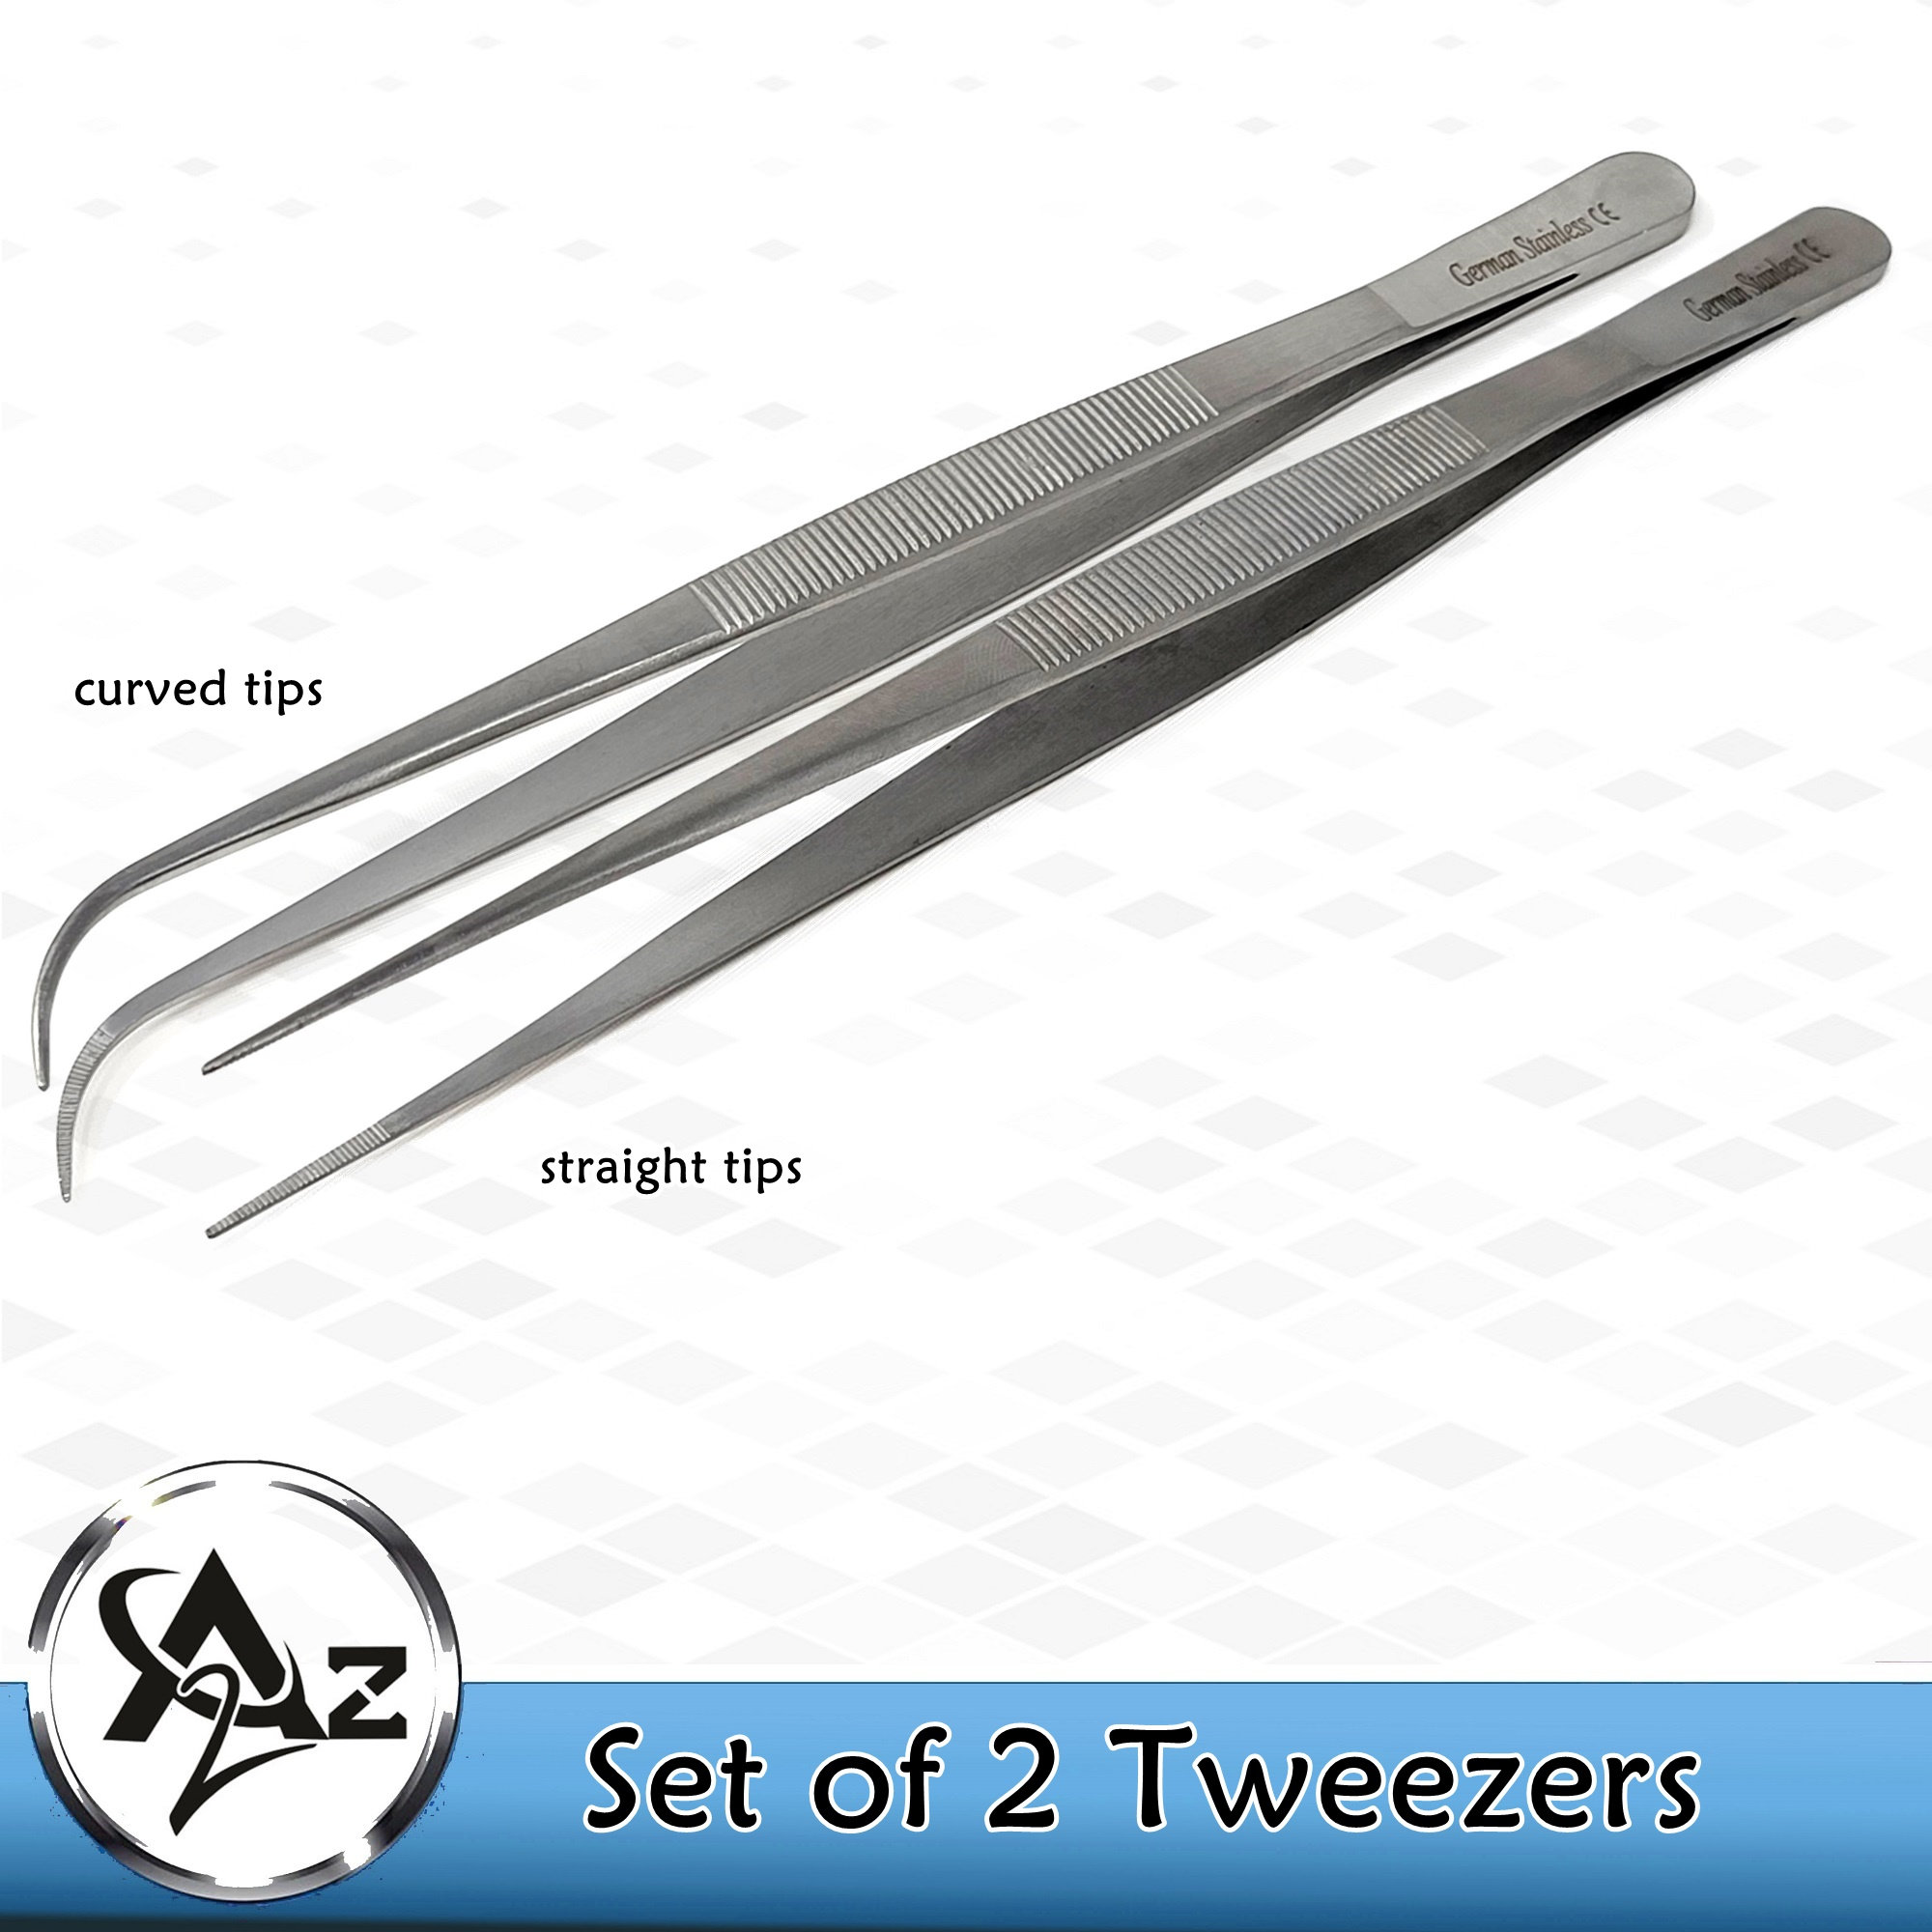 Curved Point Tweezers for Crafts - Stainless Steel 4.5 Long